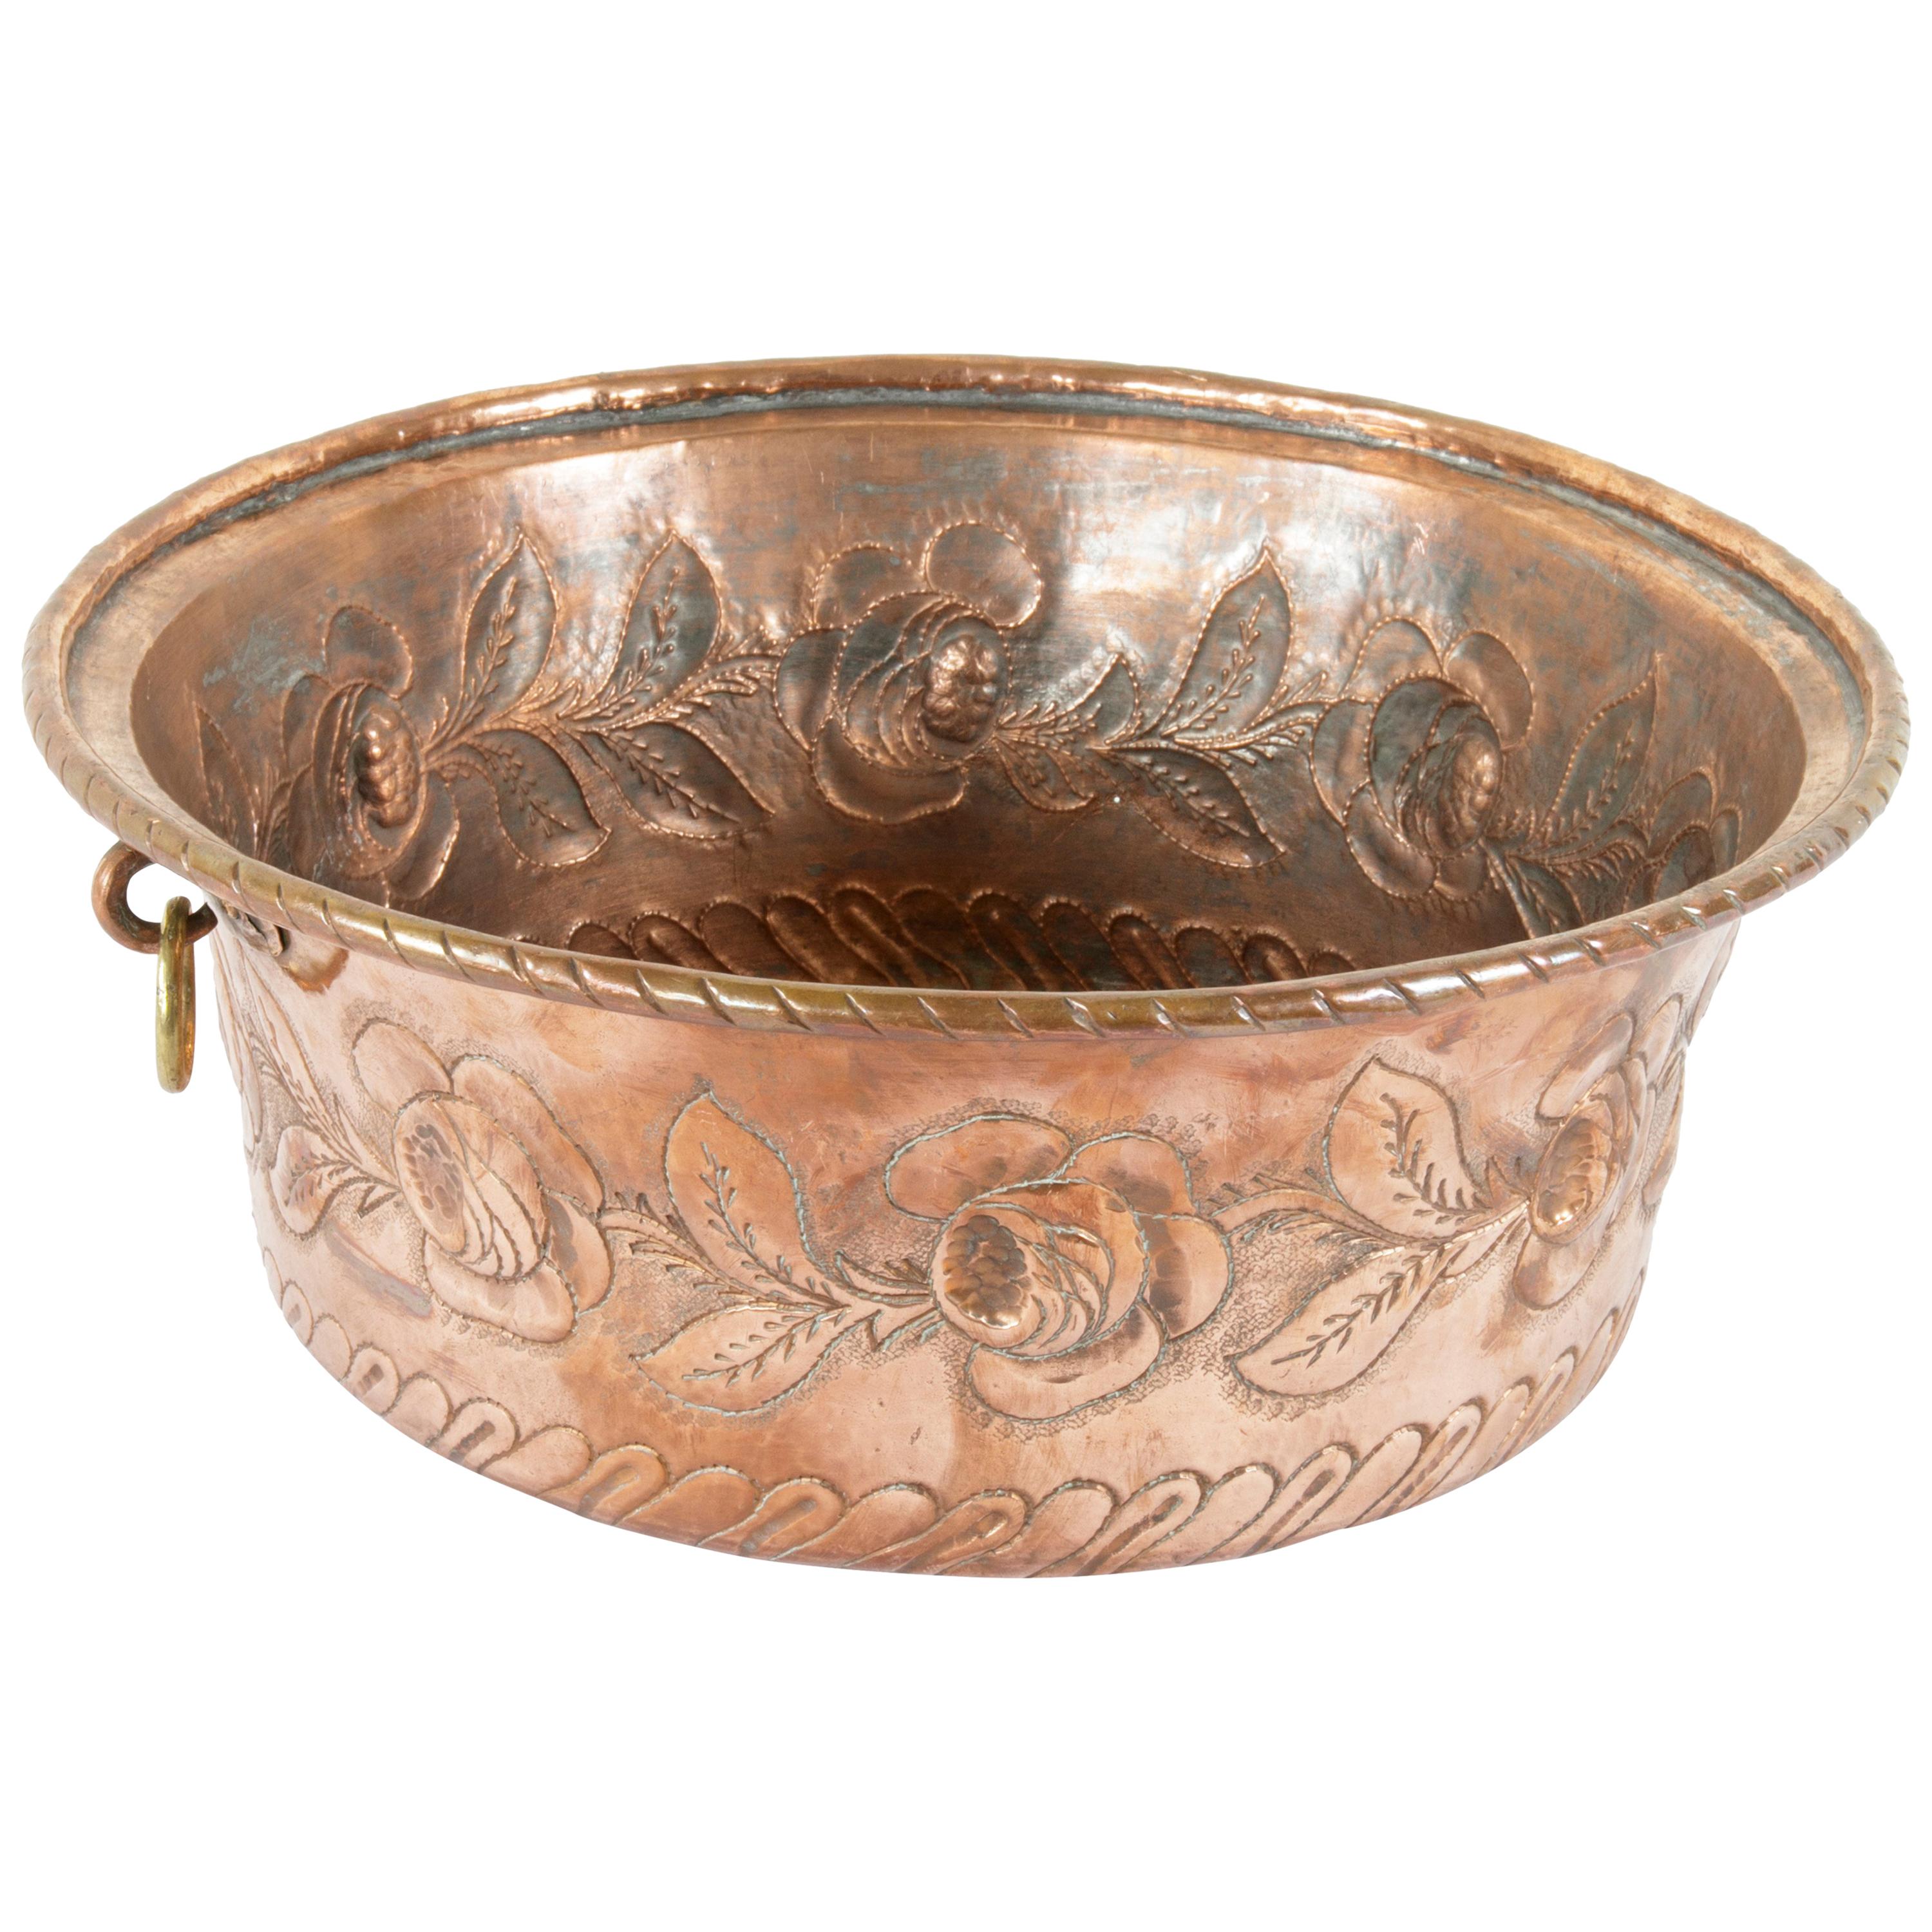 Mid-19th Century French Hand Hammered Copper Repousse Cauldron, Bowl, Cachepot